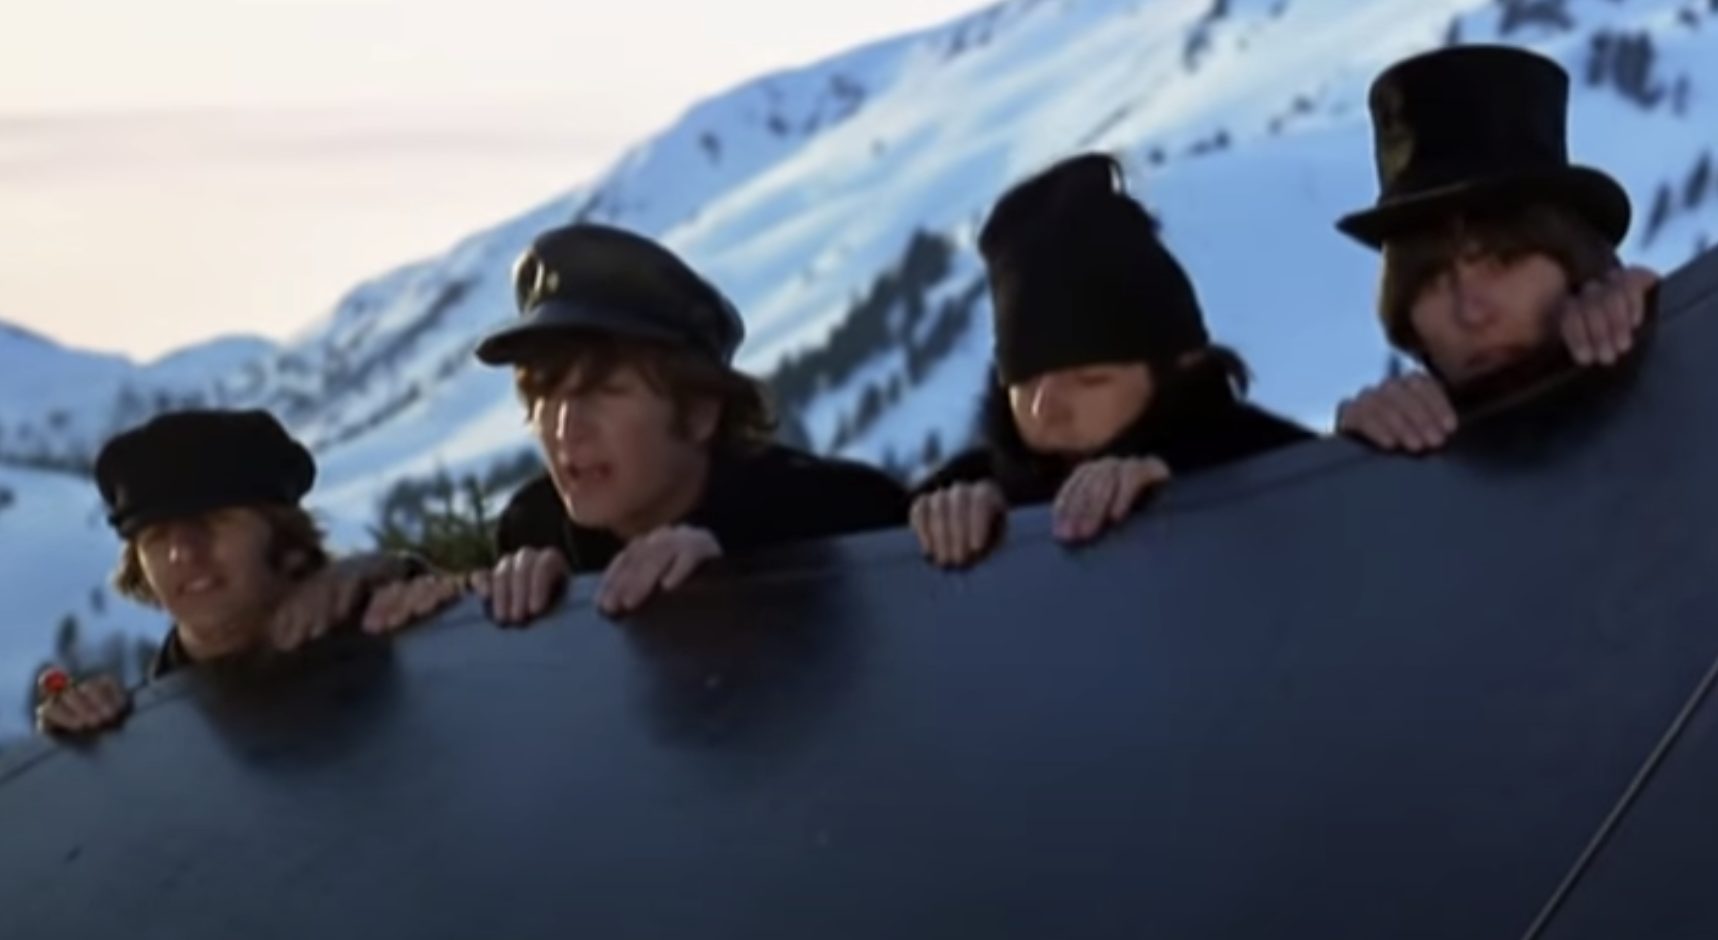 The four Beatles look over a ledge in the snowy alps